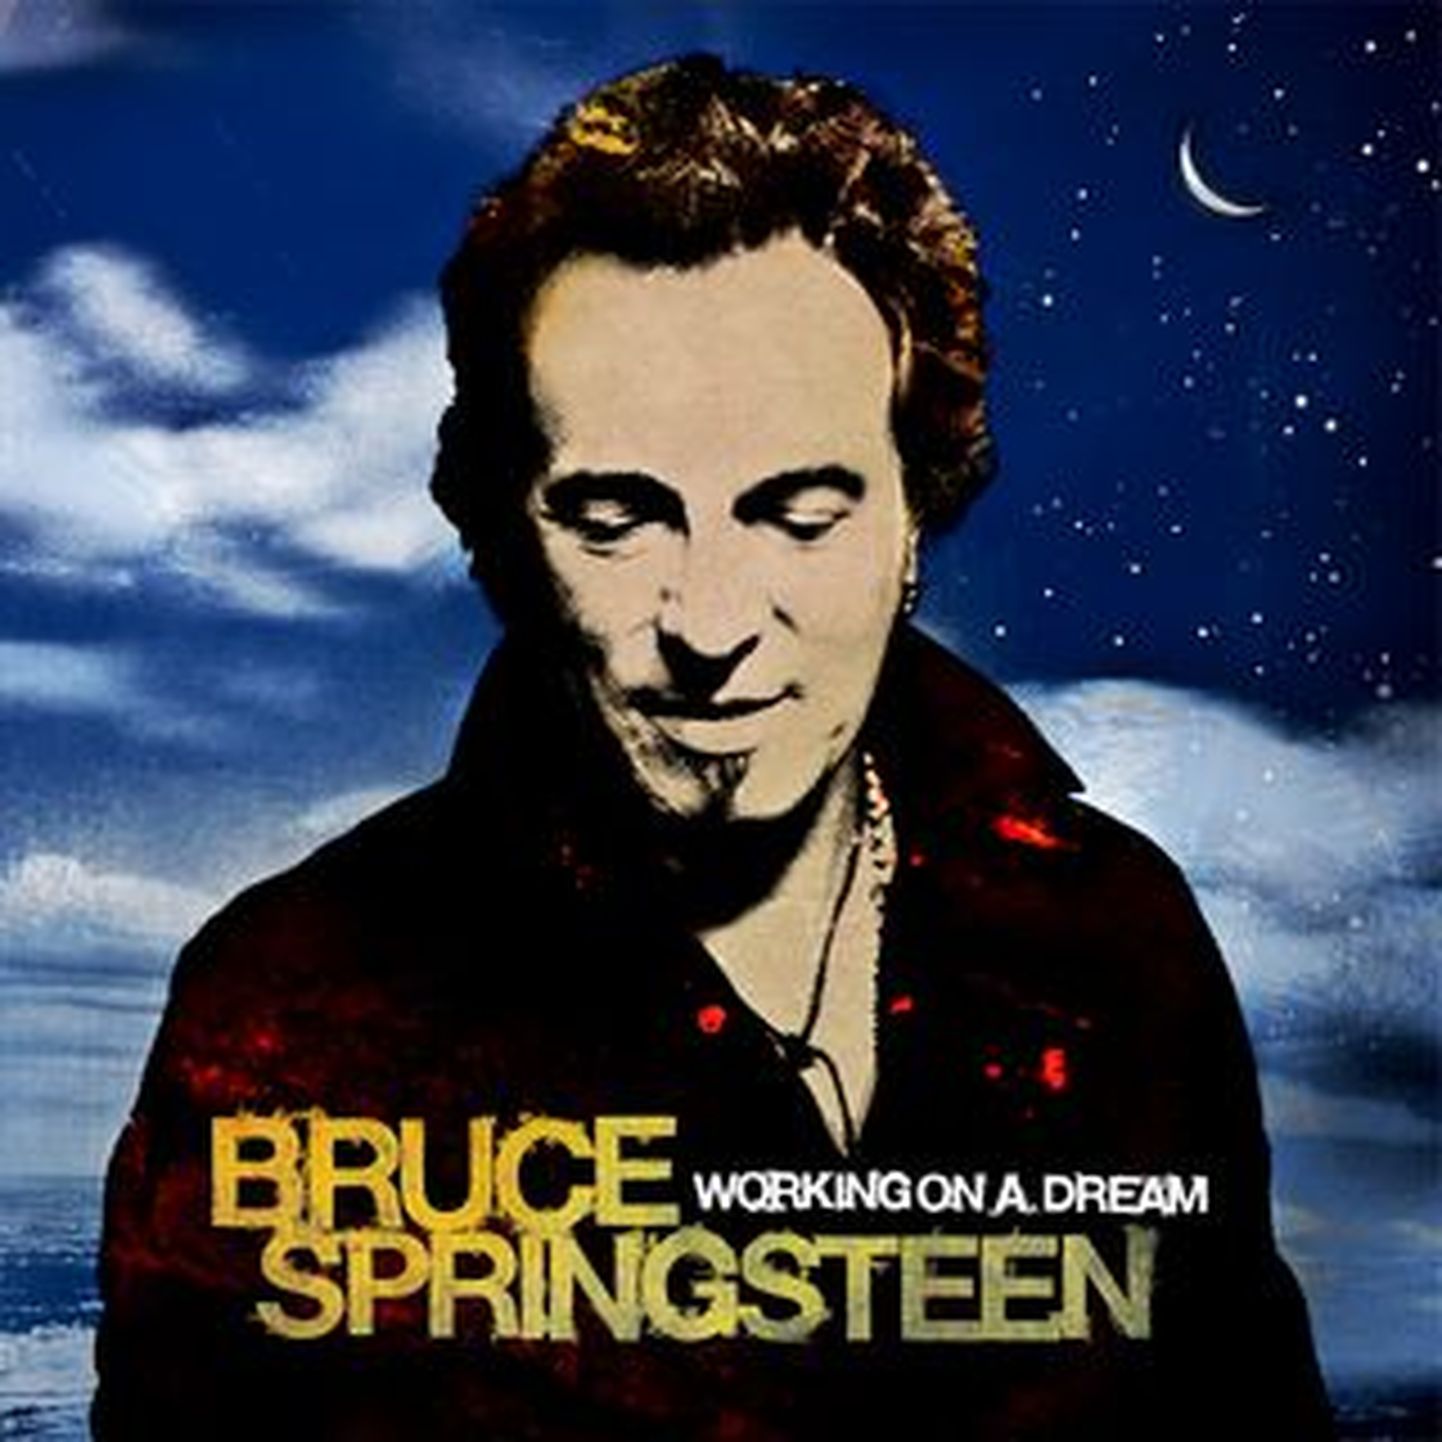 Bruce Springsteen “Working On A Dream”.